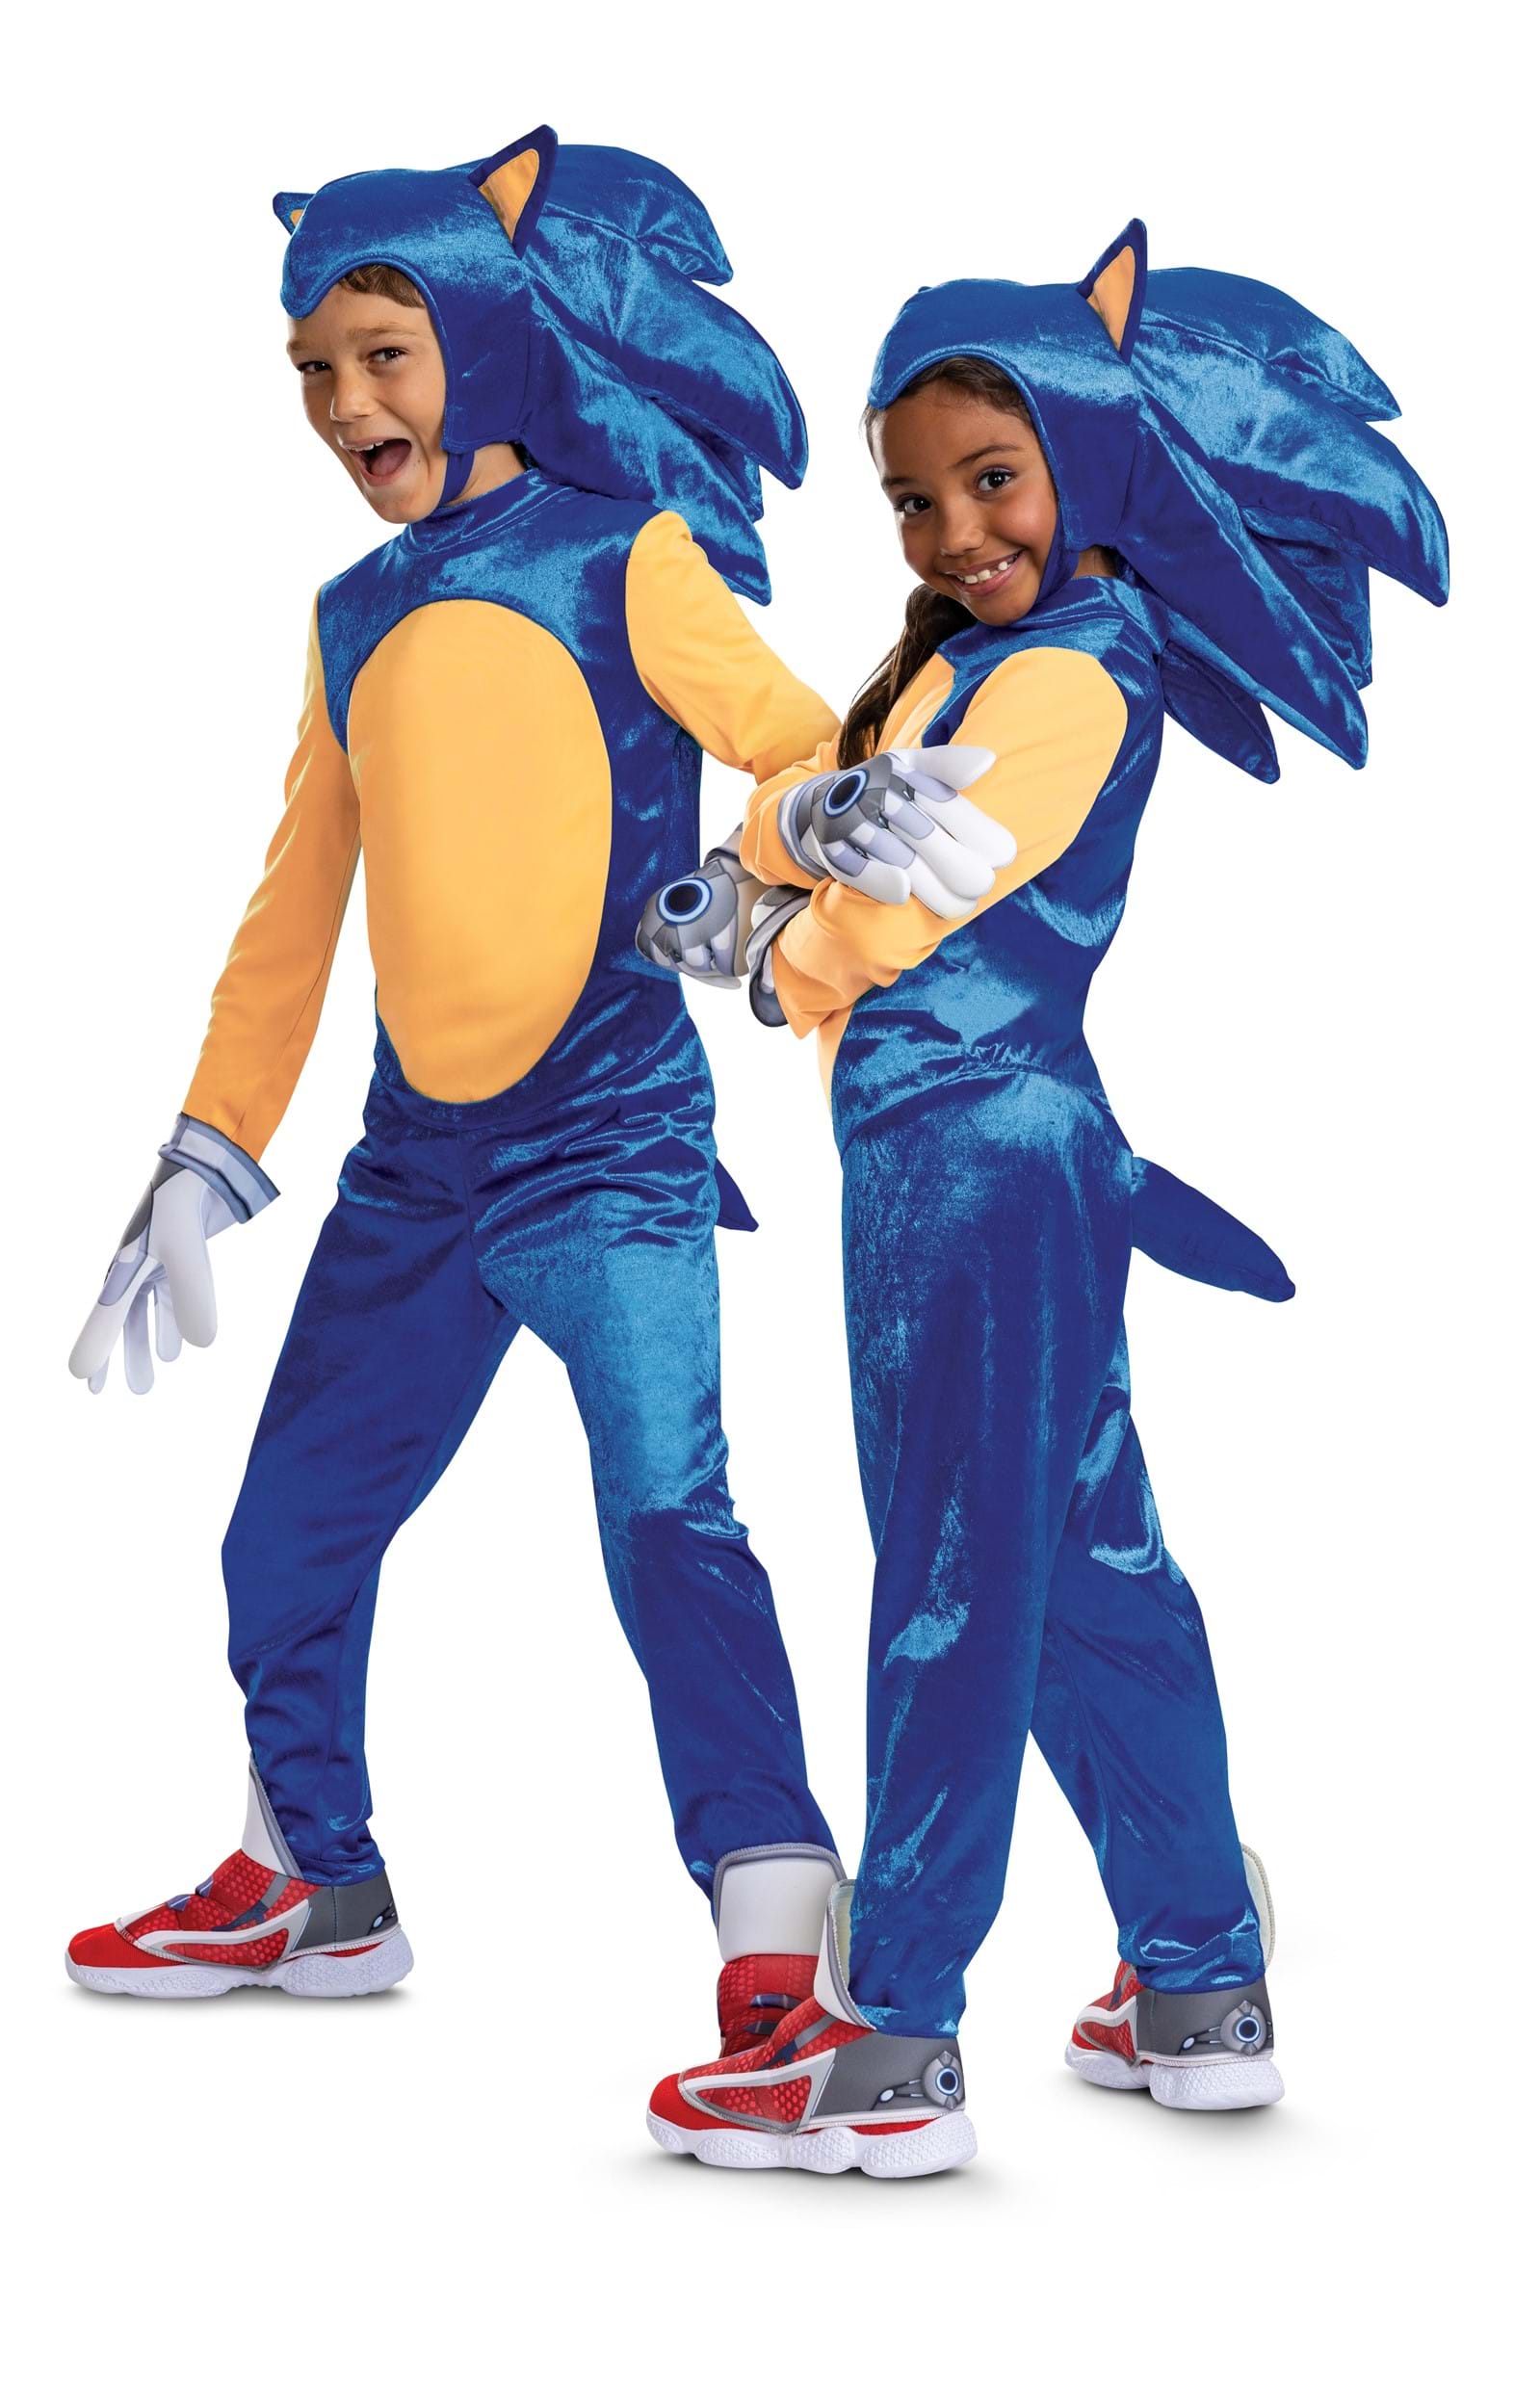 https://images.halloween.com/products/91738/1-1/sonic-the-hedgehog-child-sonic-prime-costume.jpg